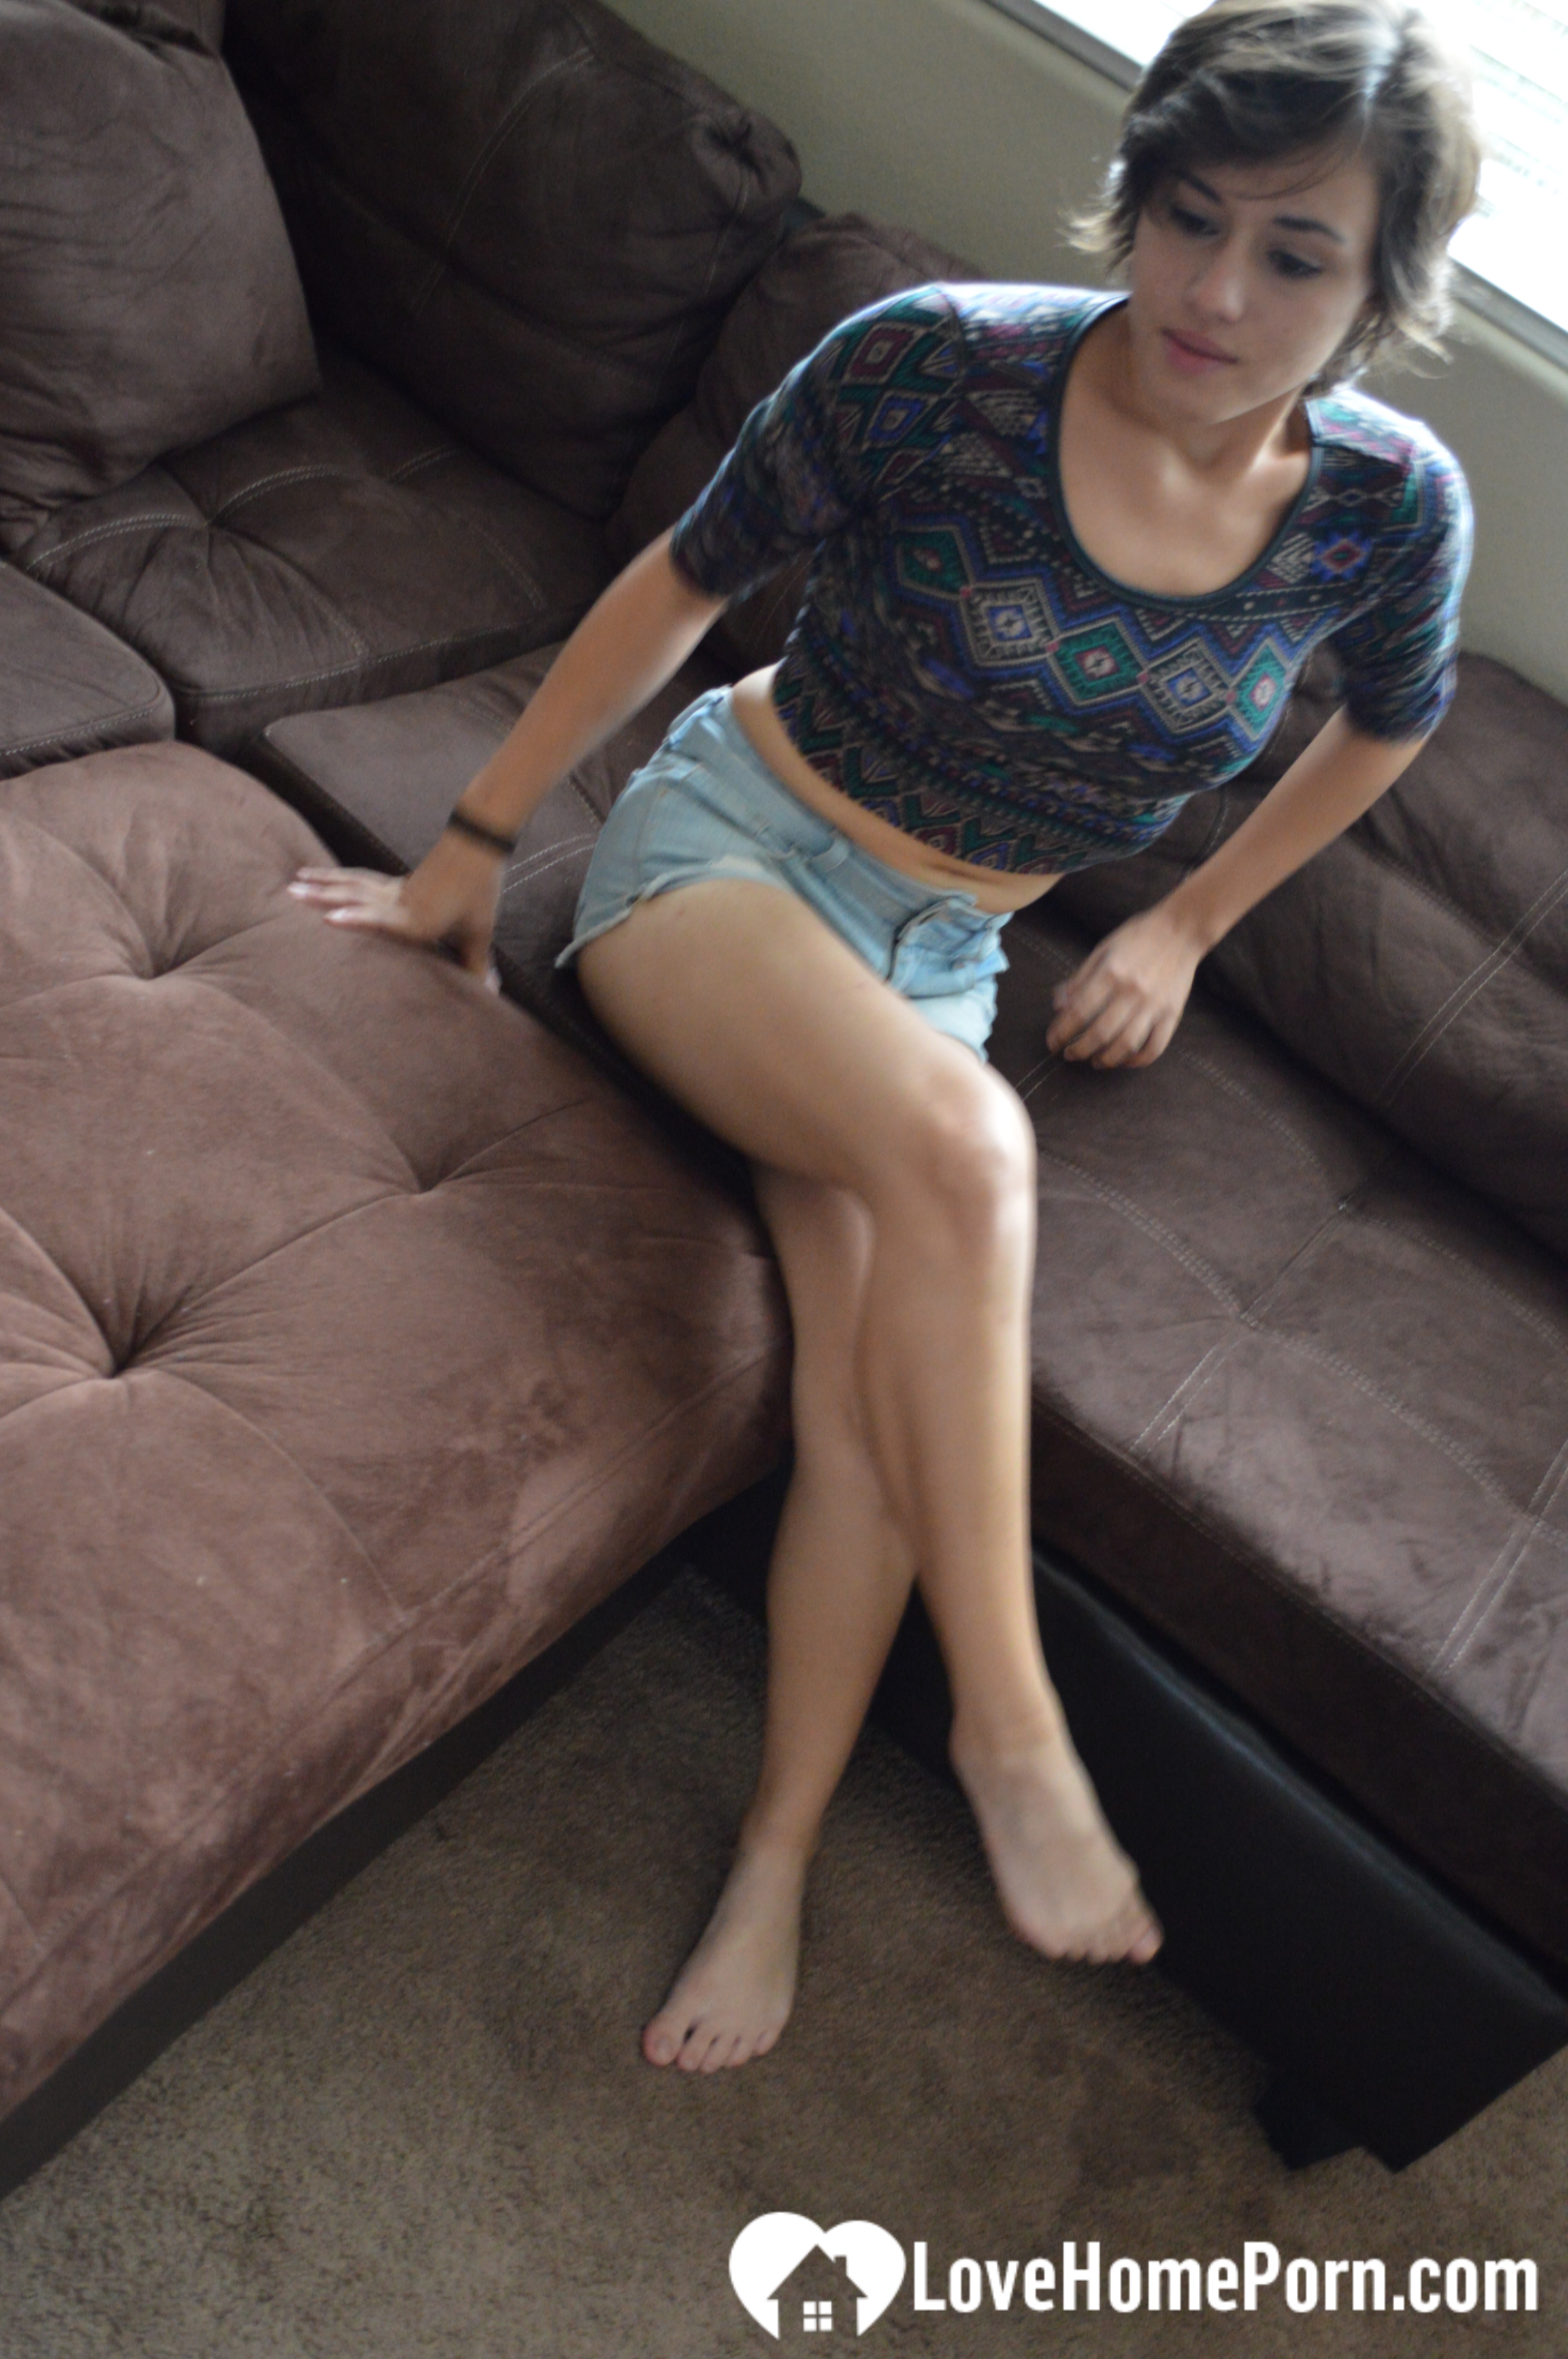 Pretty brunette satisfies herself on the couch